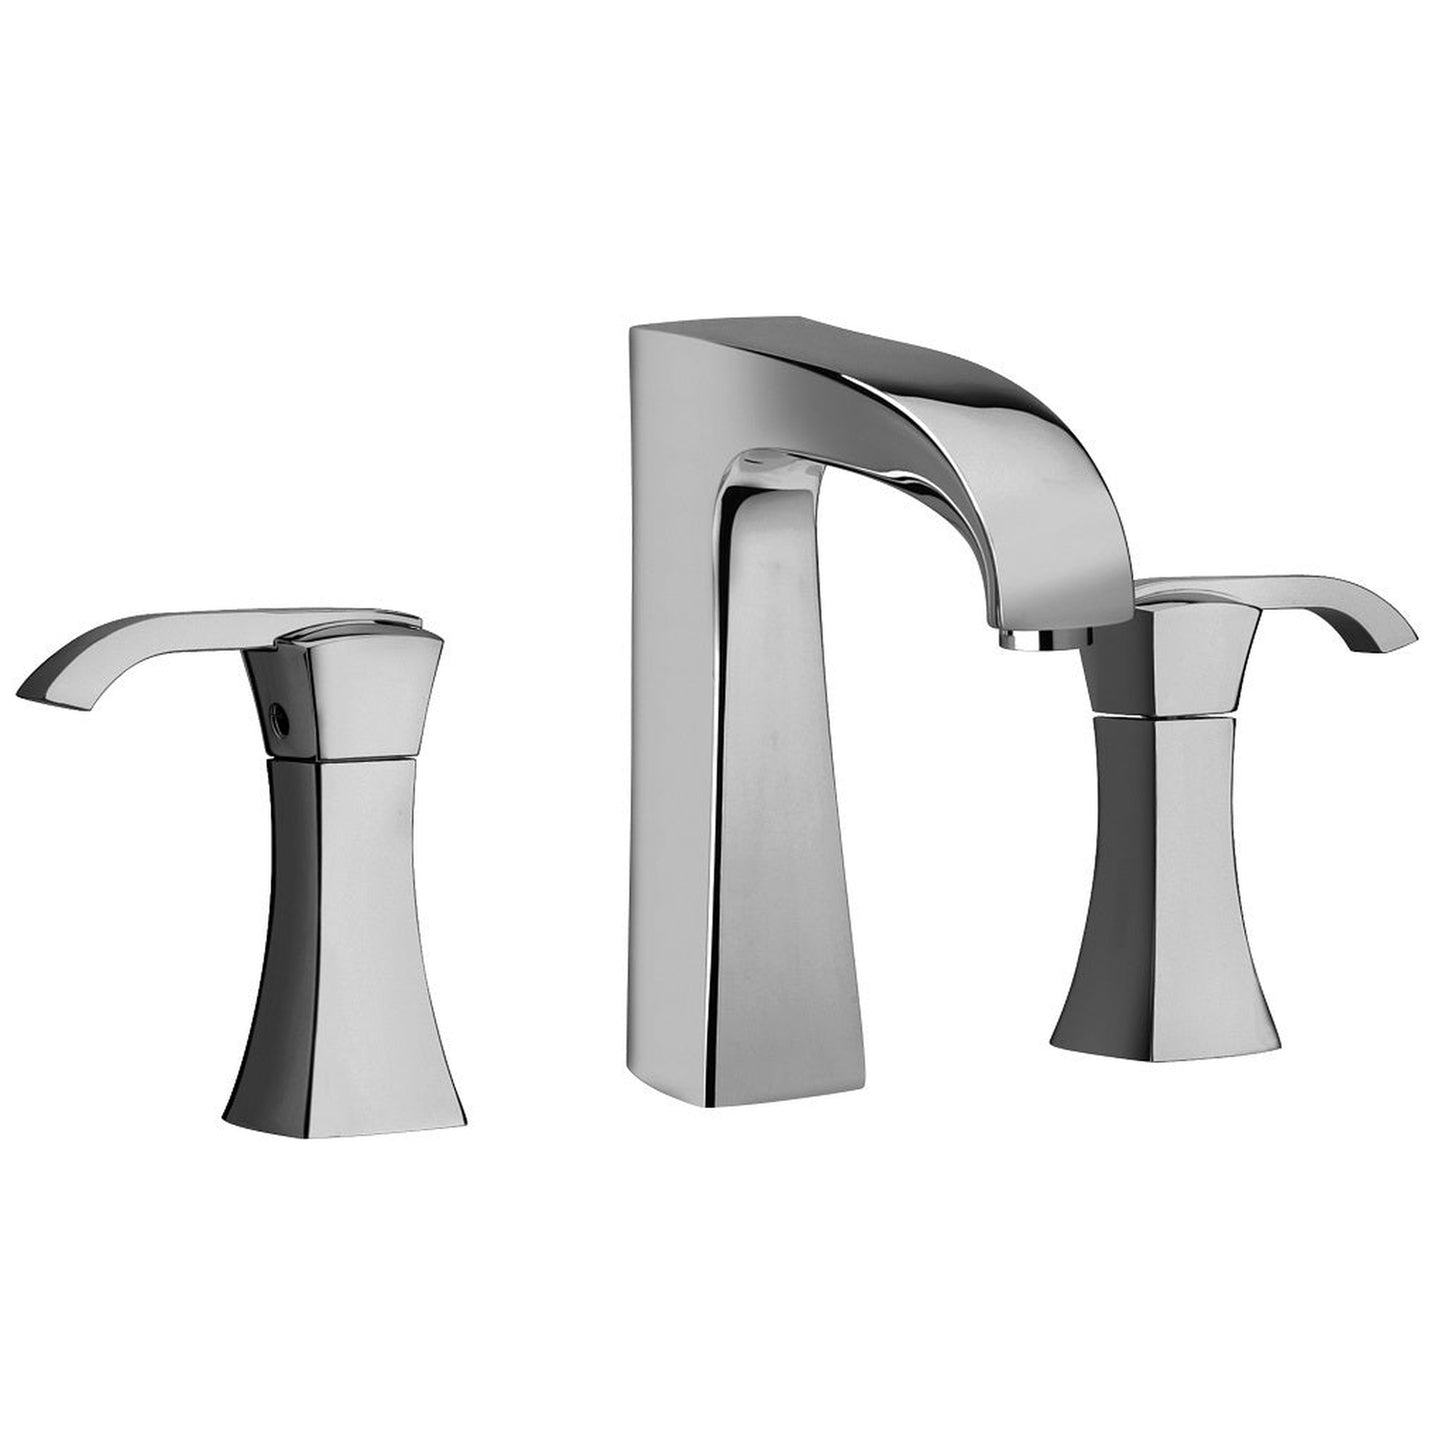 LaToscana Lady Chrome Widespread Lavatory Faucet With Lever Handles